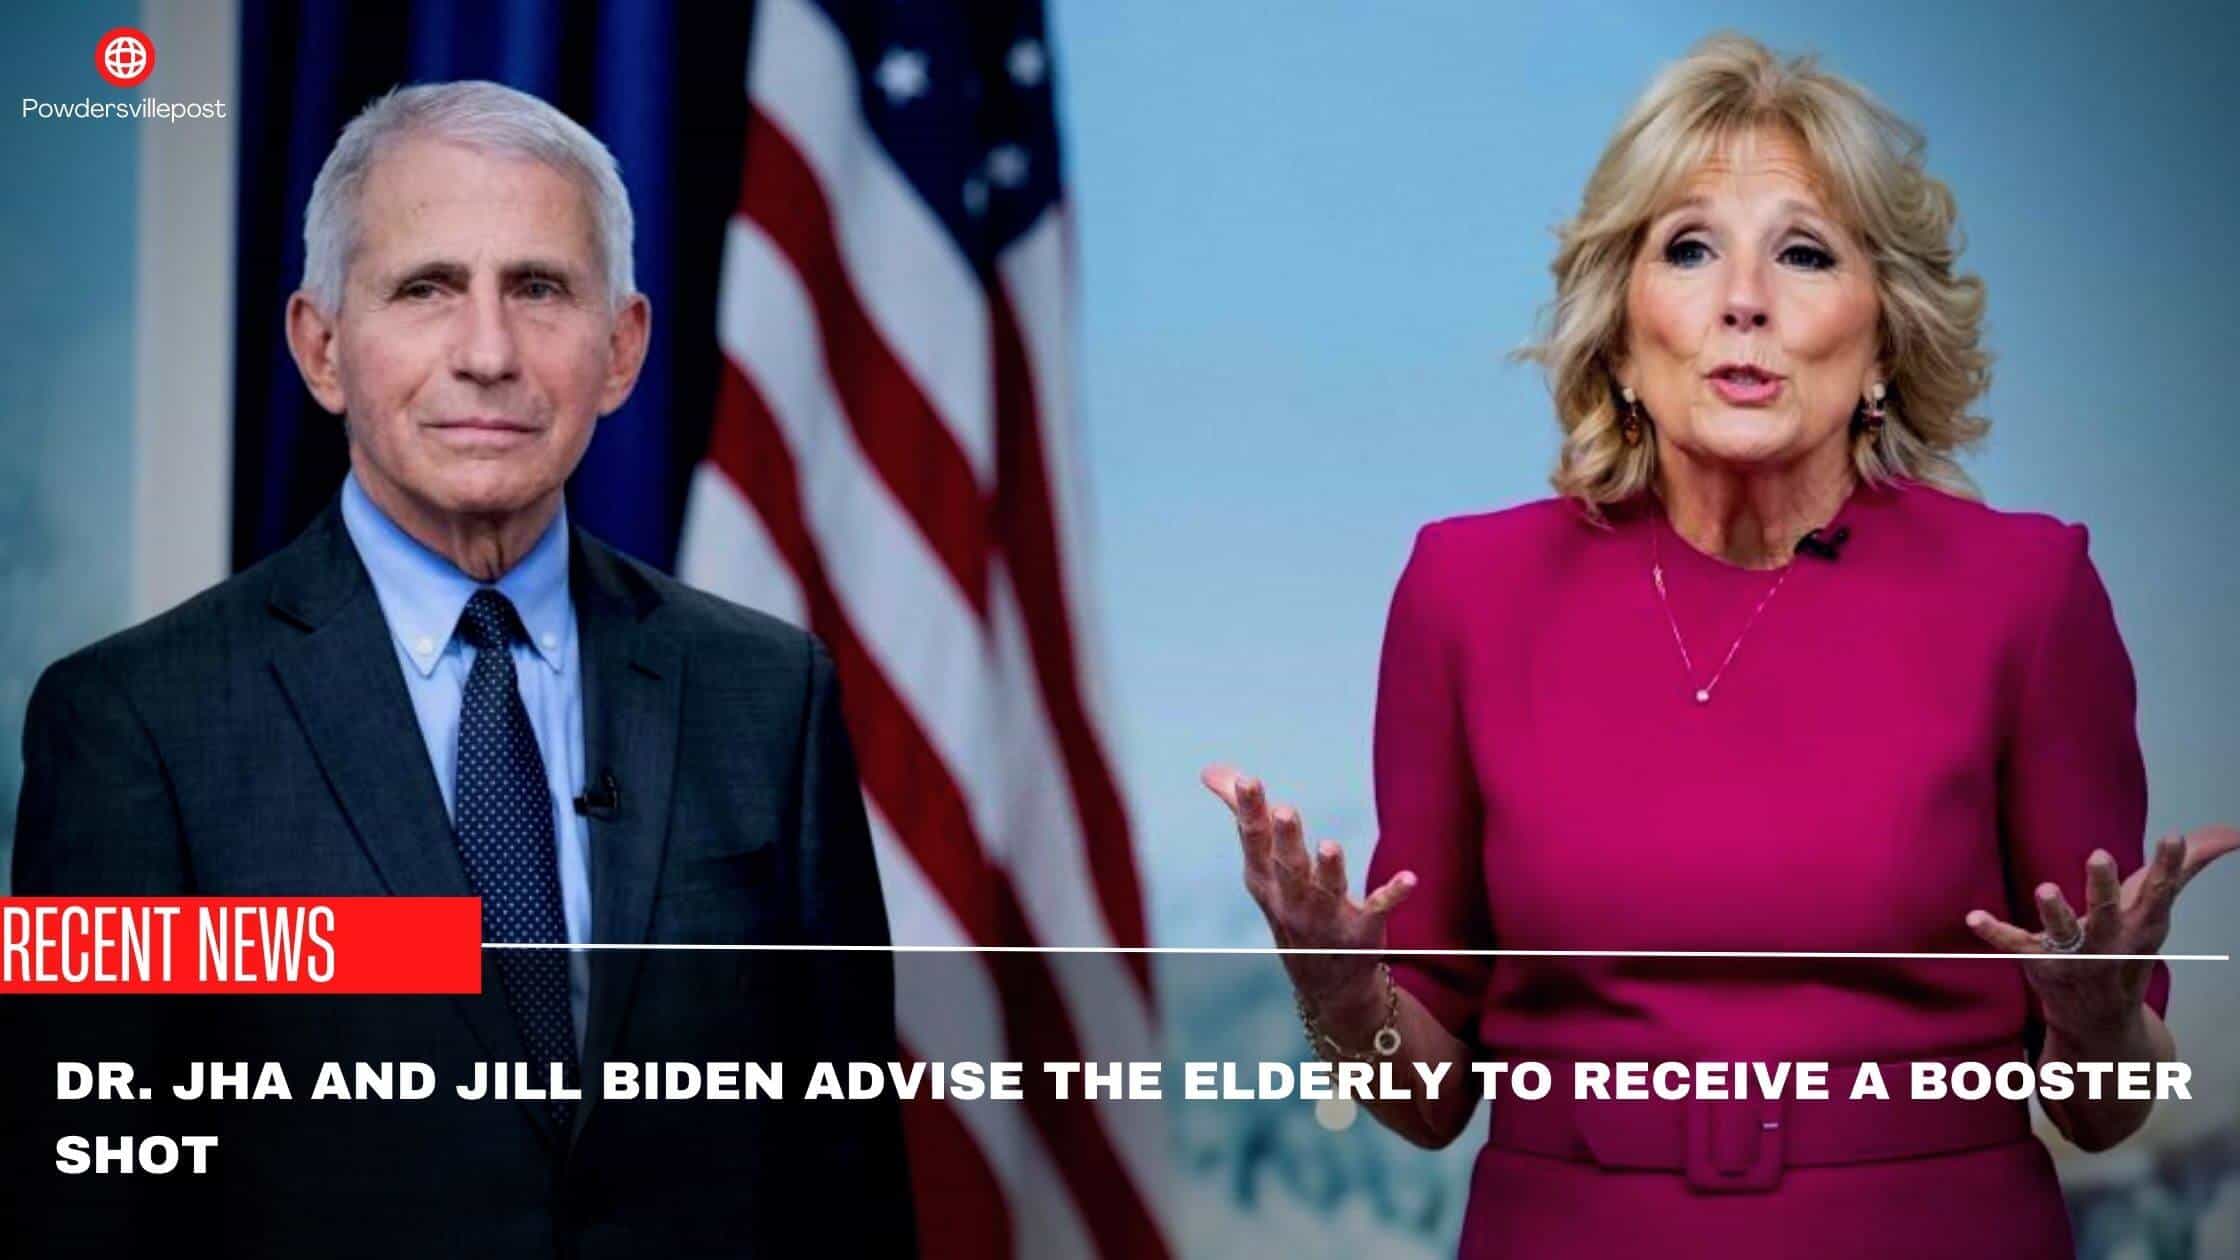 Dr. Jha And Jill Biden Advise The Elderly To Receive A Booster Shot